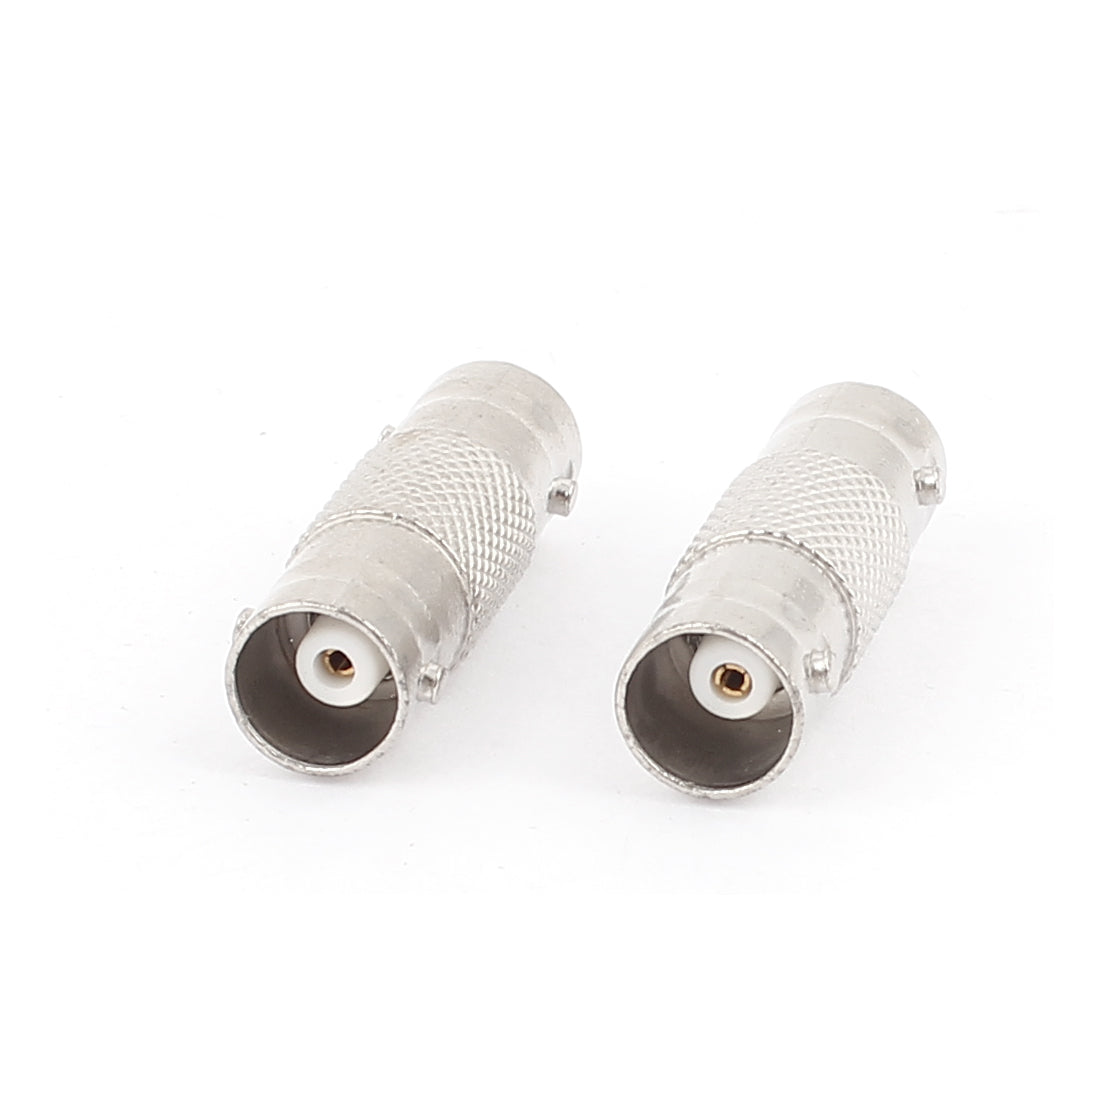 uxcell Uxcell BNC Female to Female CCTV Camera RG59 Coaxial Cable Coupler Adapter Connector 2pcs